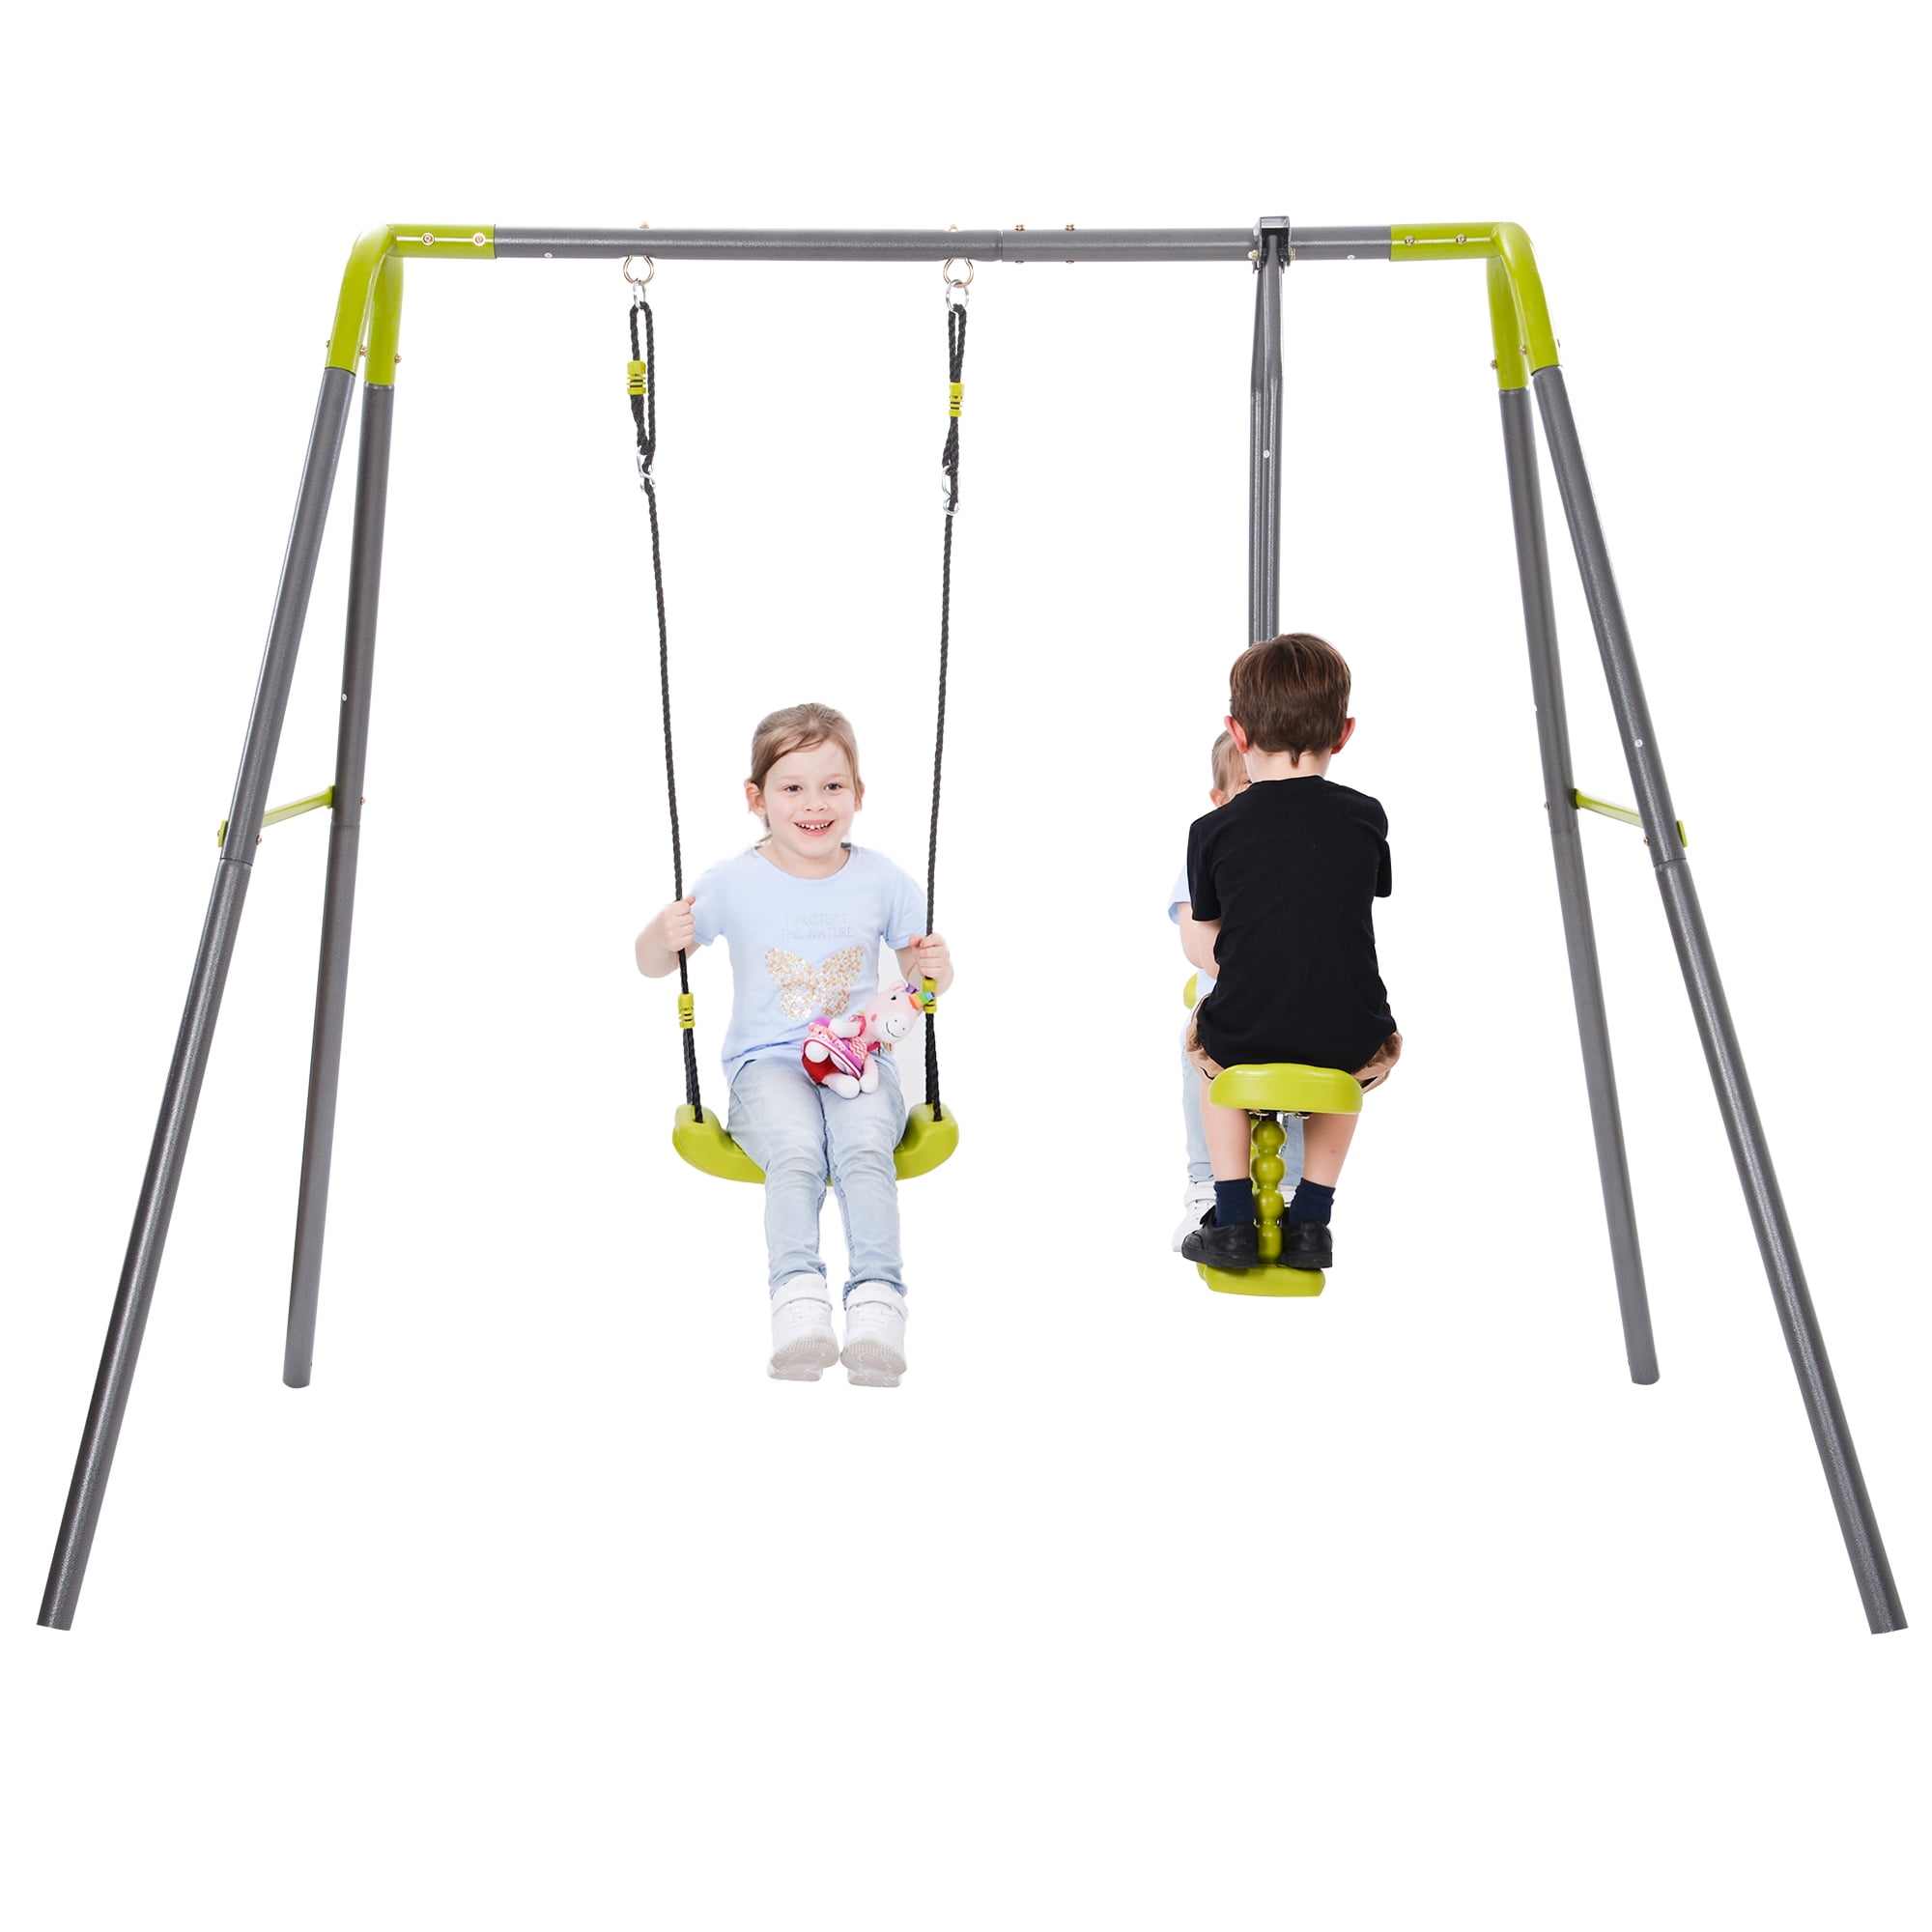 Hanging Mesh Rope Swing Set with Adjustable Ropes and Detachable Bar with Back for Indoor/Outdoor/Playground Children Tree Swing Seat with 2 Hooks and Swing Straps Swing Seat for Kids Backyard 